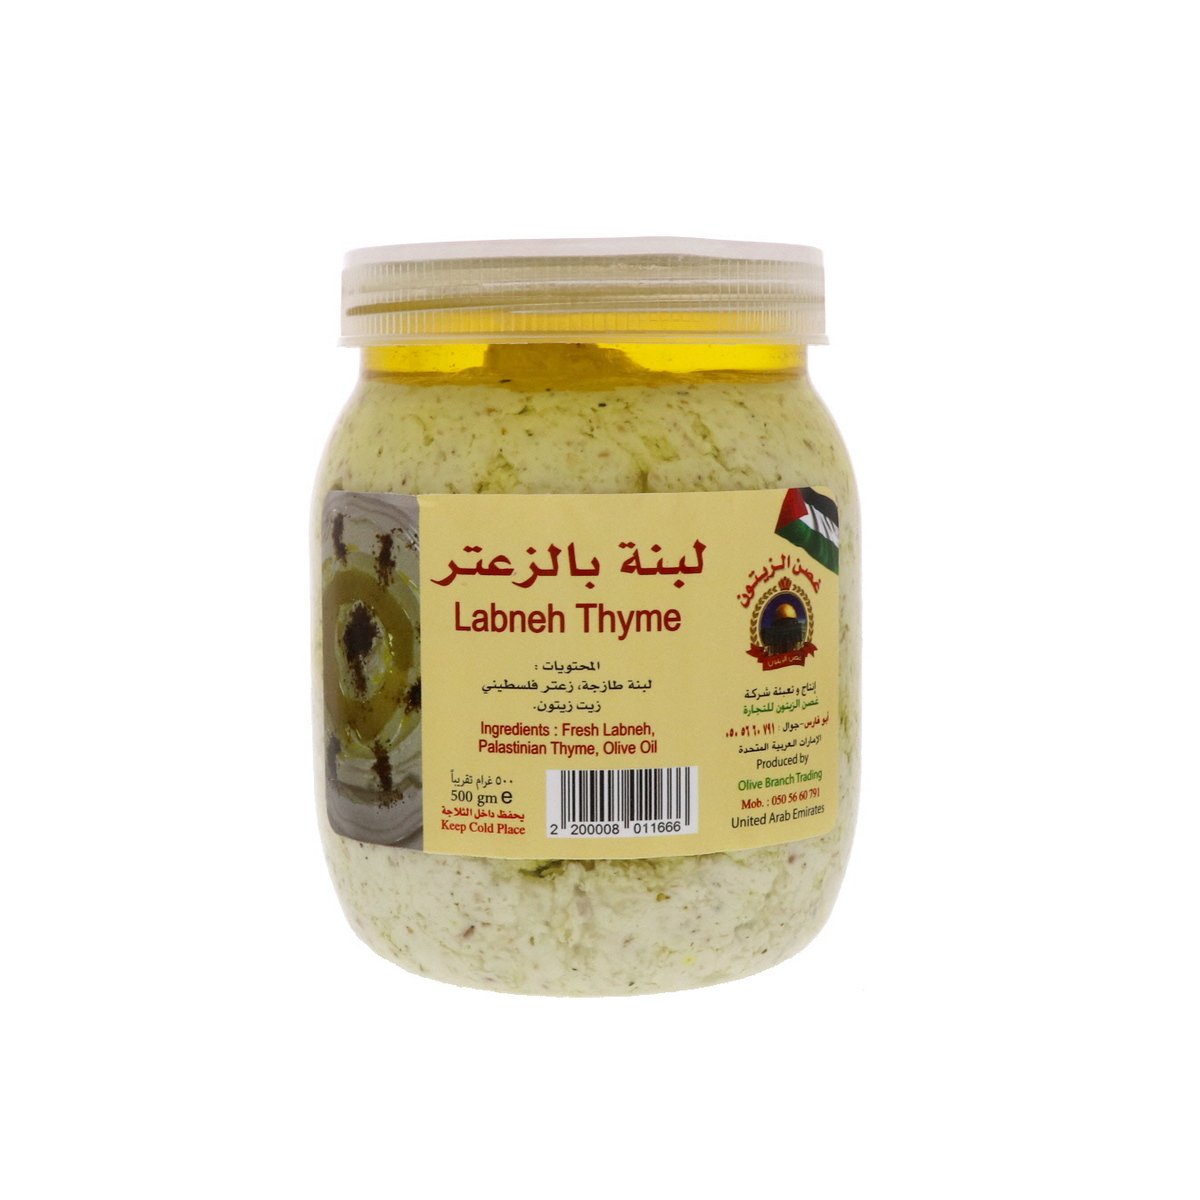 Olive Branch Labneh Thyme 500g